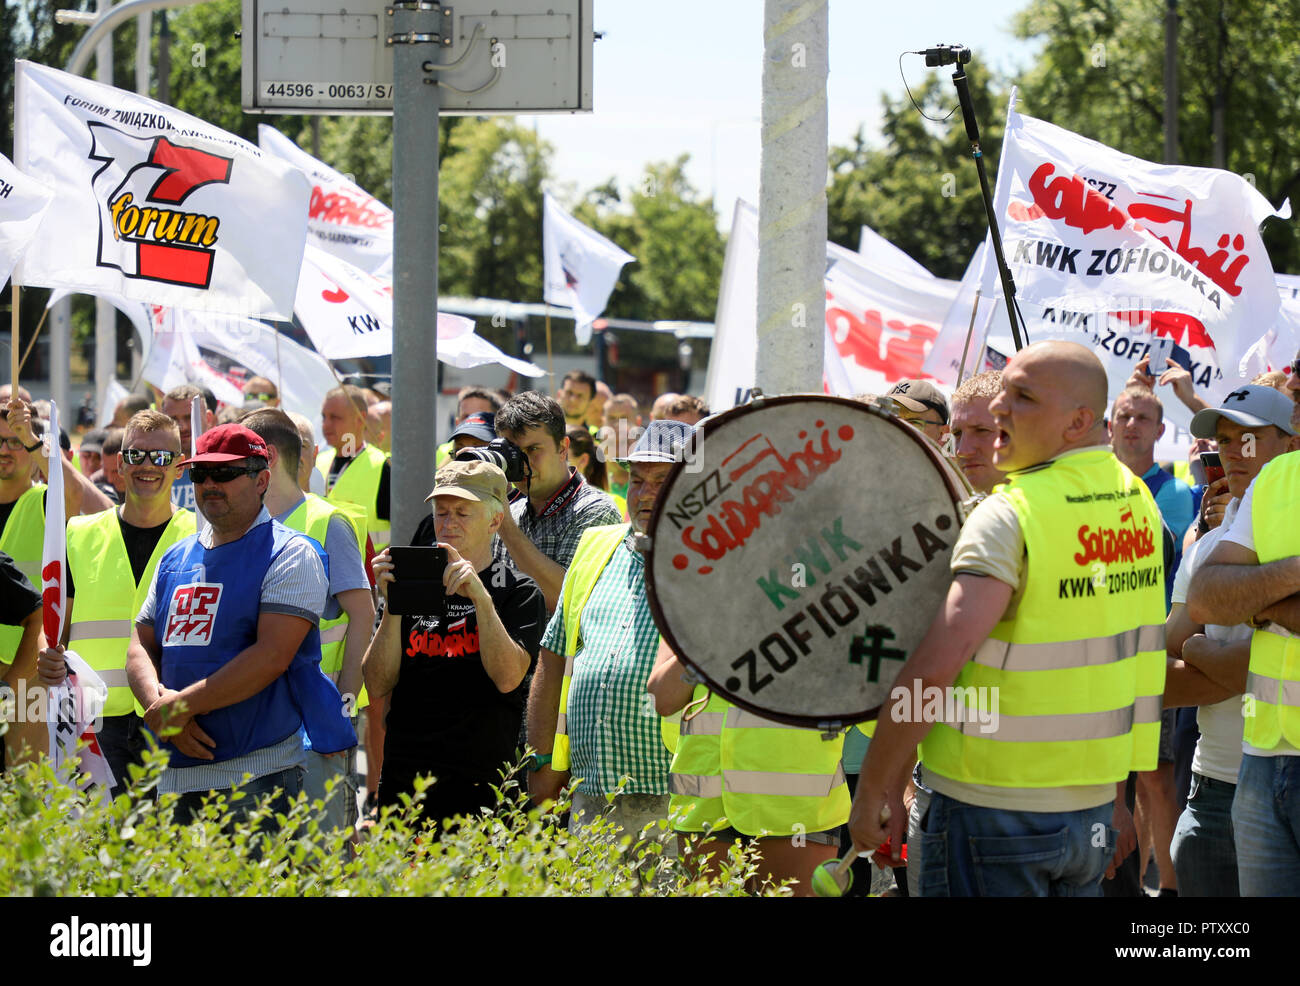 Warsaw, Poland. 24th June, 2019. Empolyees of Jastrzebska Spolka Weglowa, one of Poland's large coal mining company protest in front of Law and Justice headquarters on June 24, 2019 in Warsaw, Poland. Credit: East News sp. z o.o./Alamy Live News Stock Photo